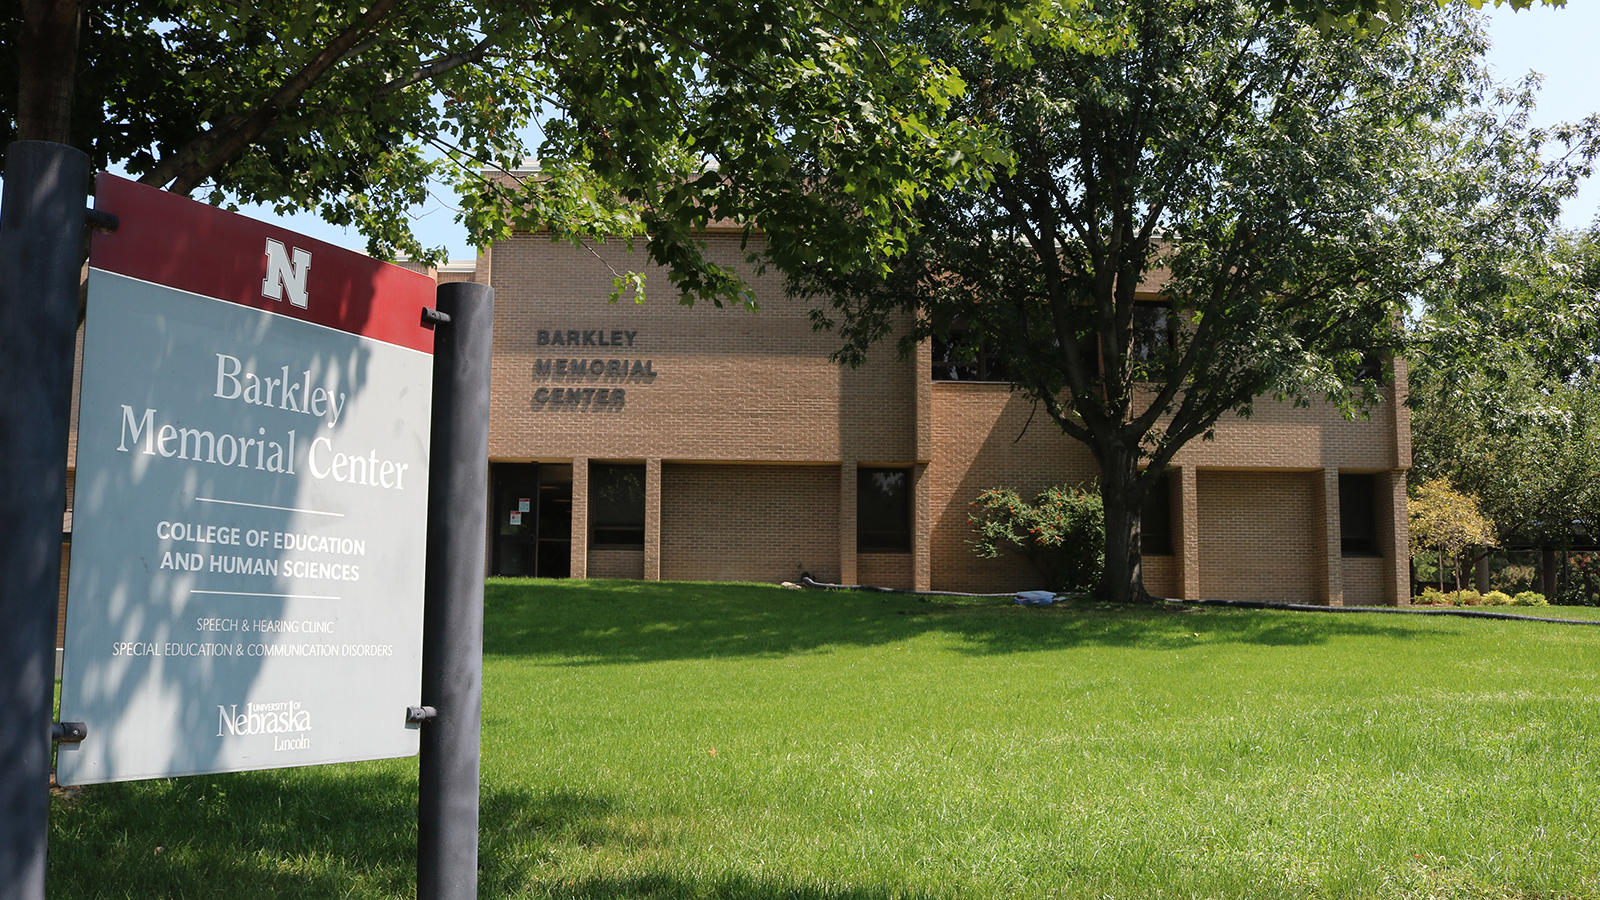 The Barkley Memorial Center is home to the Department of Special Education and Communication Disorders.